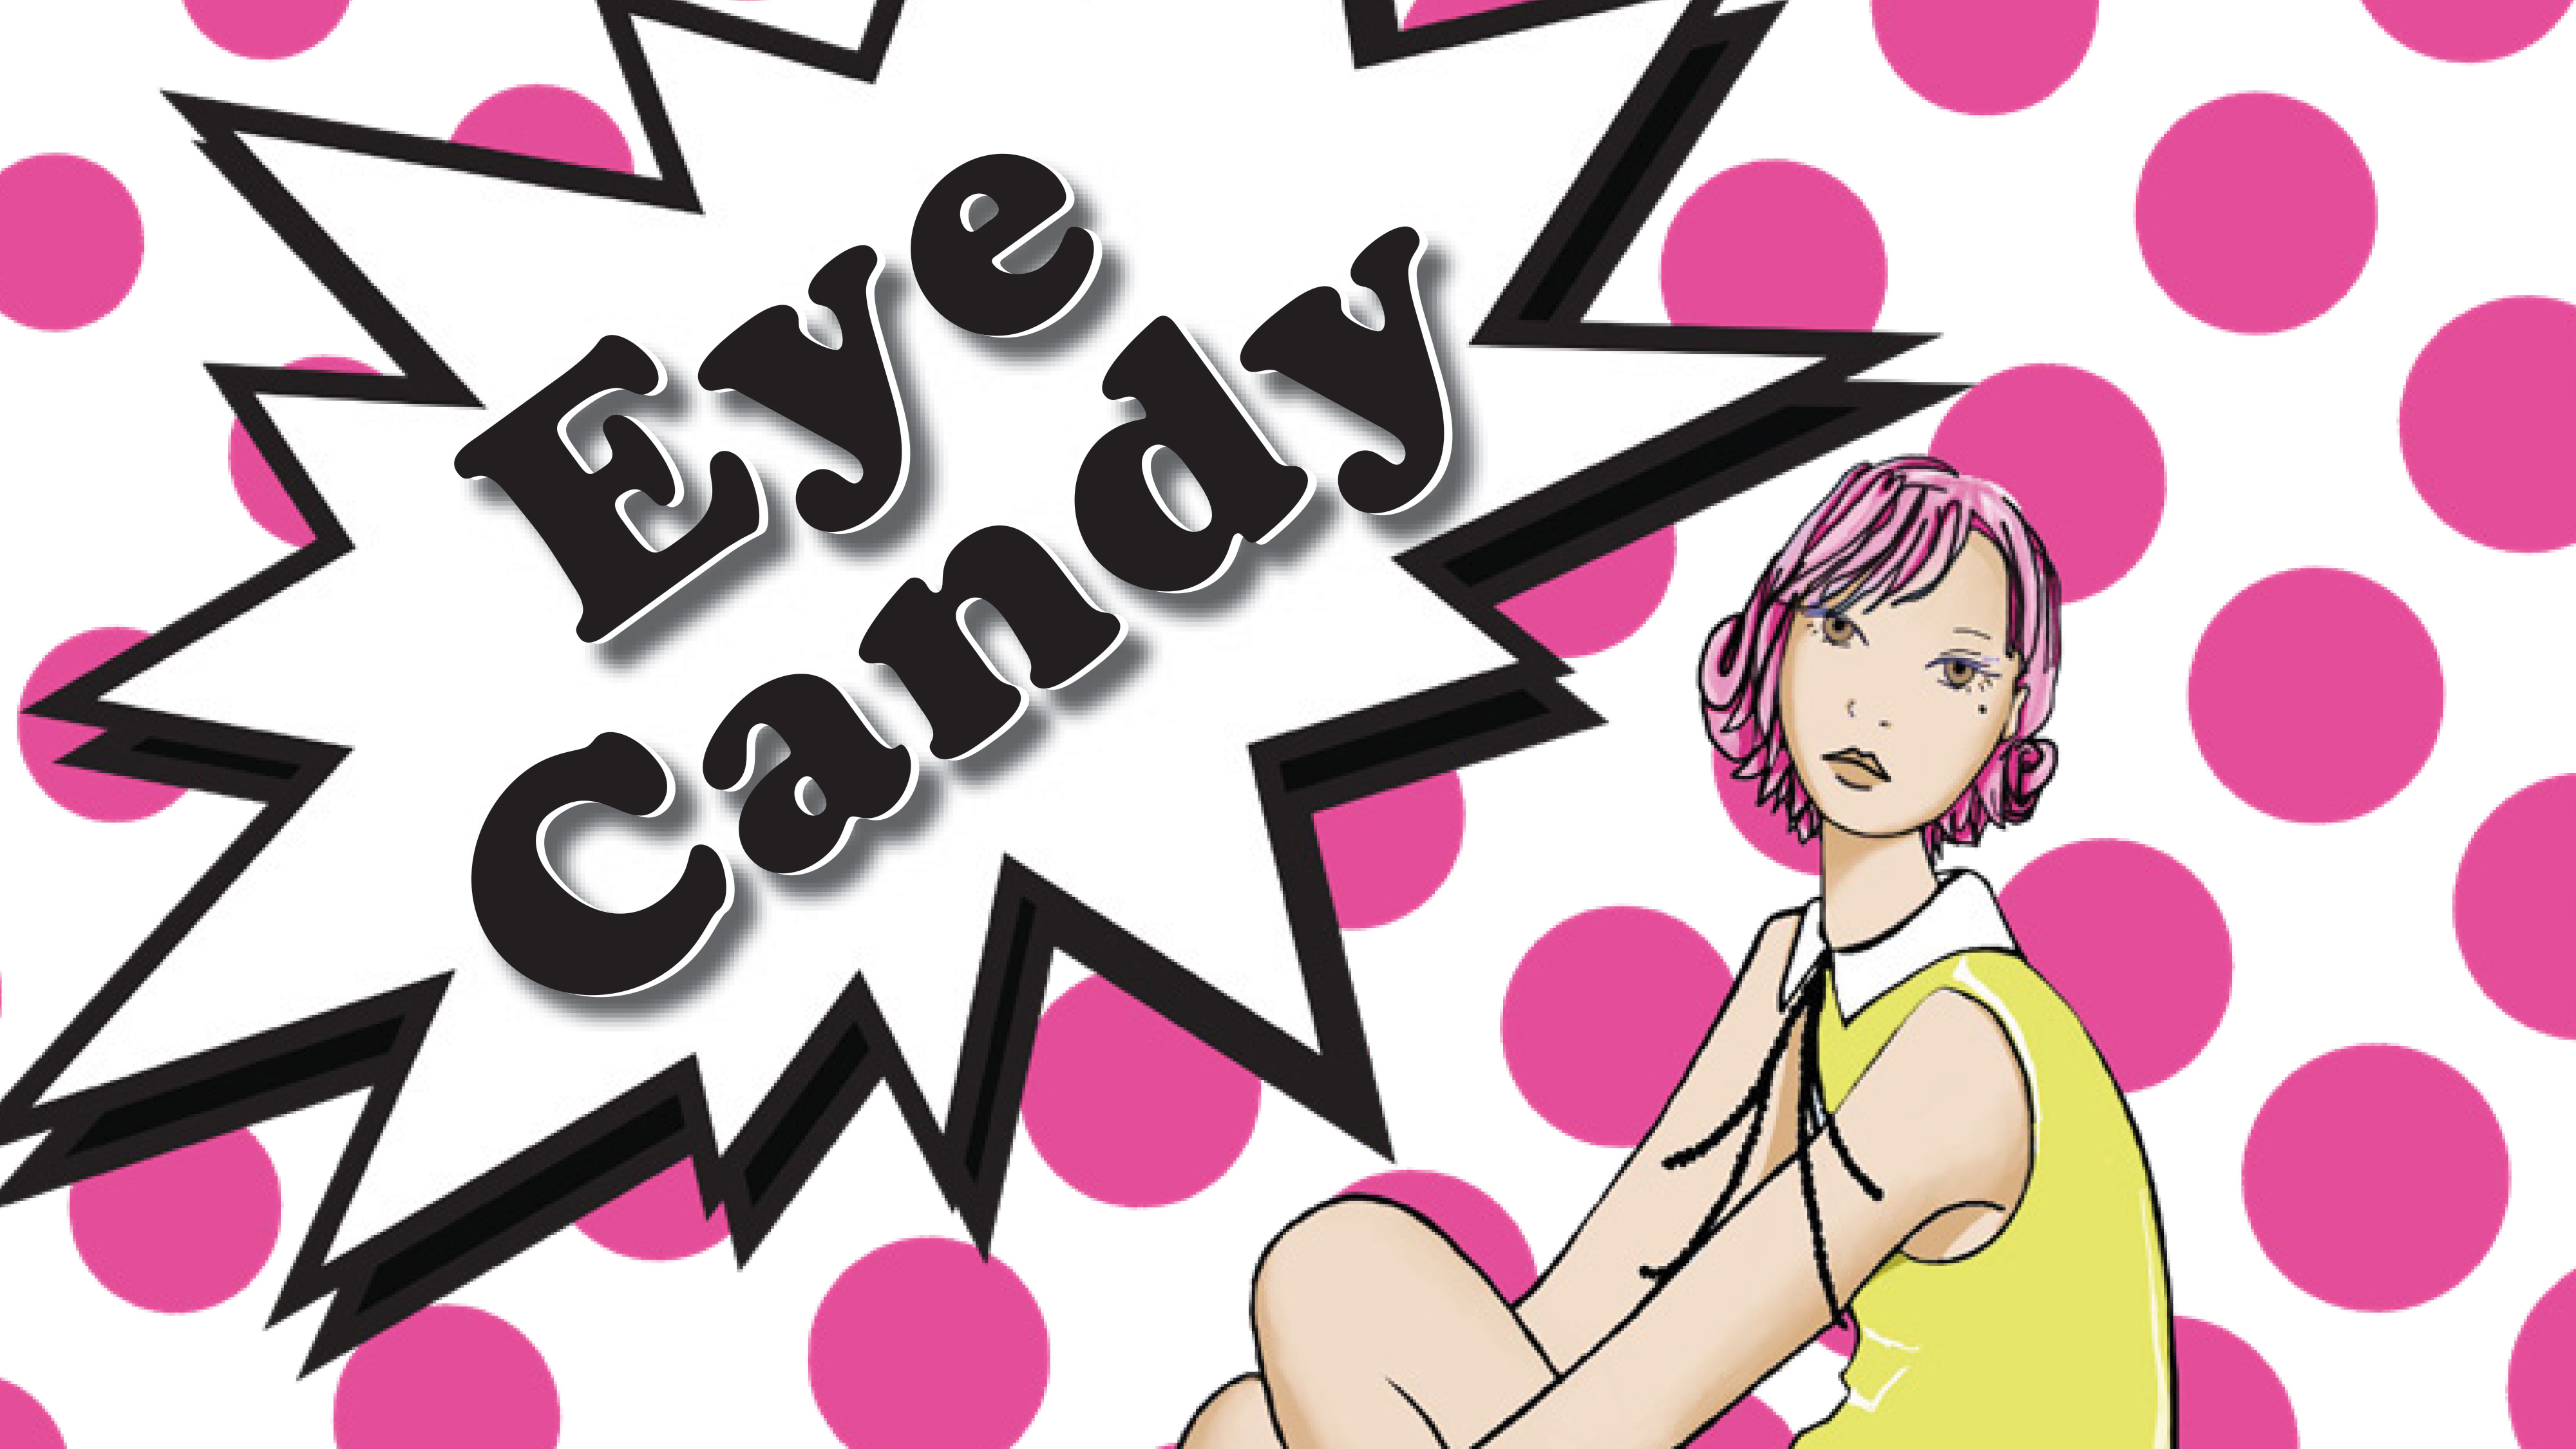 Drawing of a girl in front of polka dot wall with words "Eye Candy"